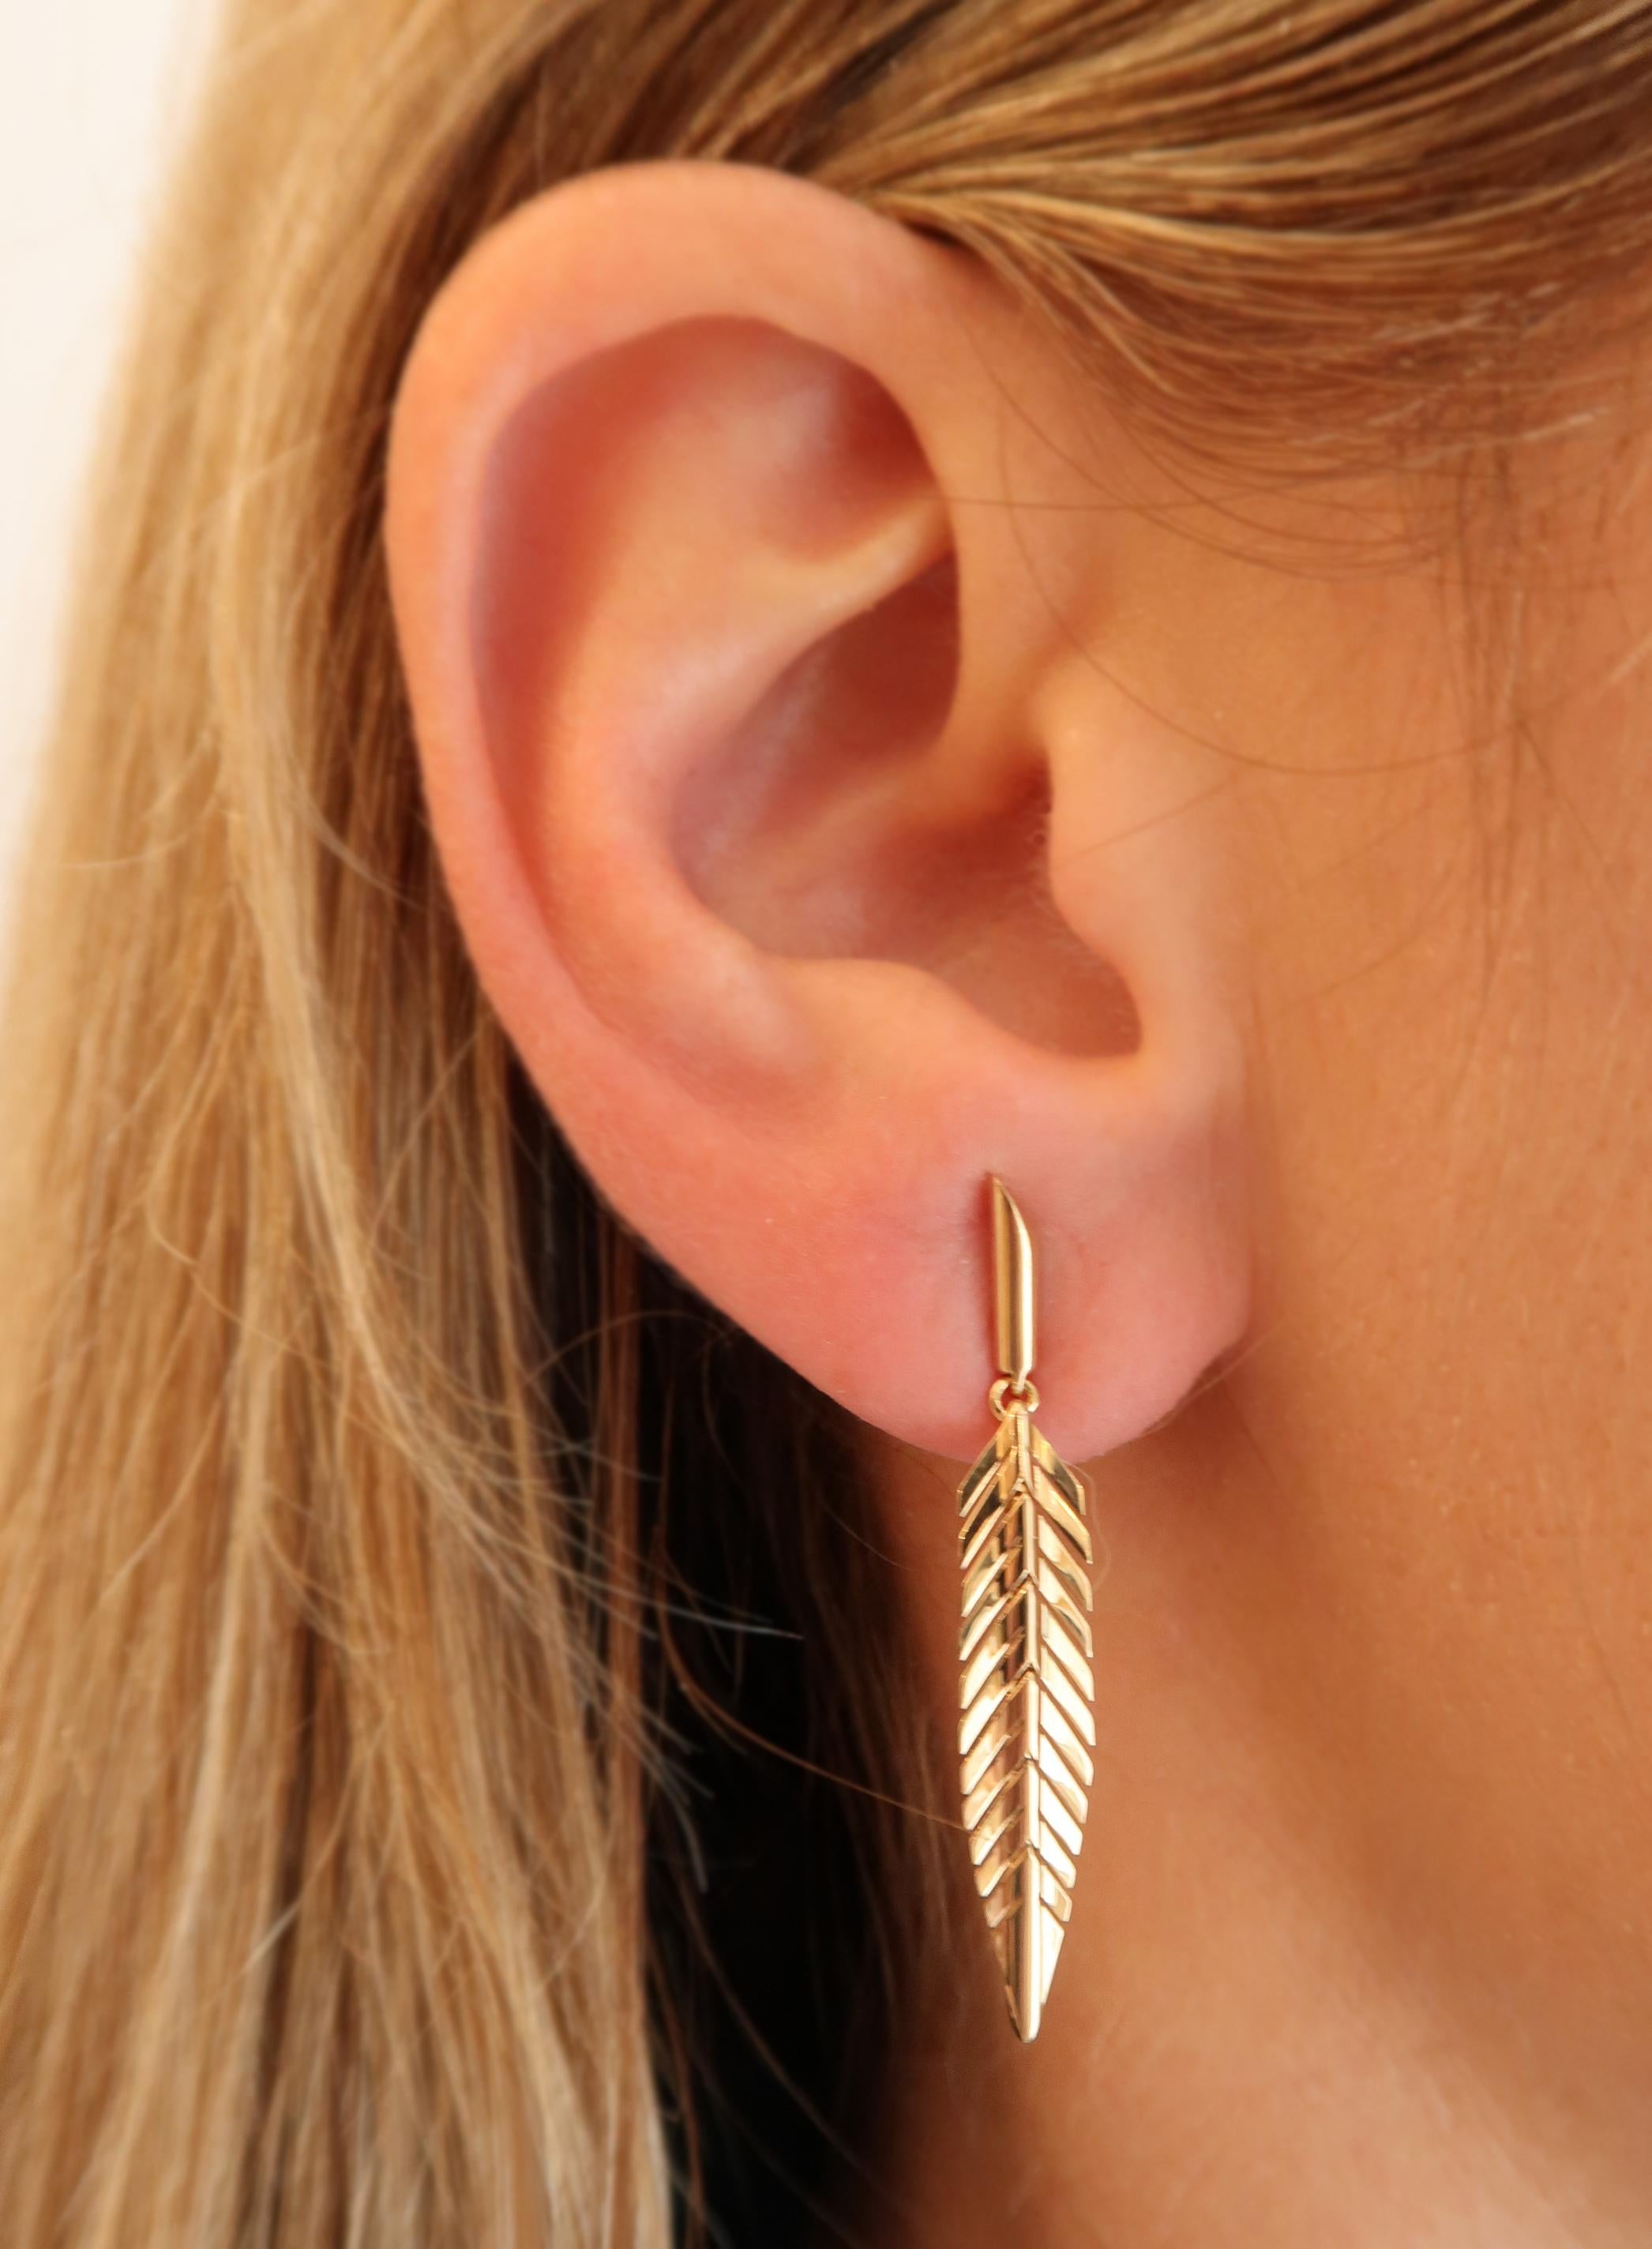 Take flight. These earrings flutter with each movement and are ideally suited for everyday wear. The Second Skin: Feather earrings are meticulously handcrafted in 18K high polished gold to replicate the delicate movement and lightness of a feather.